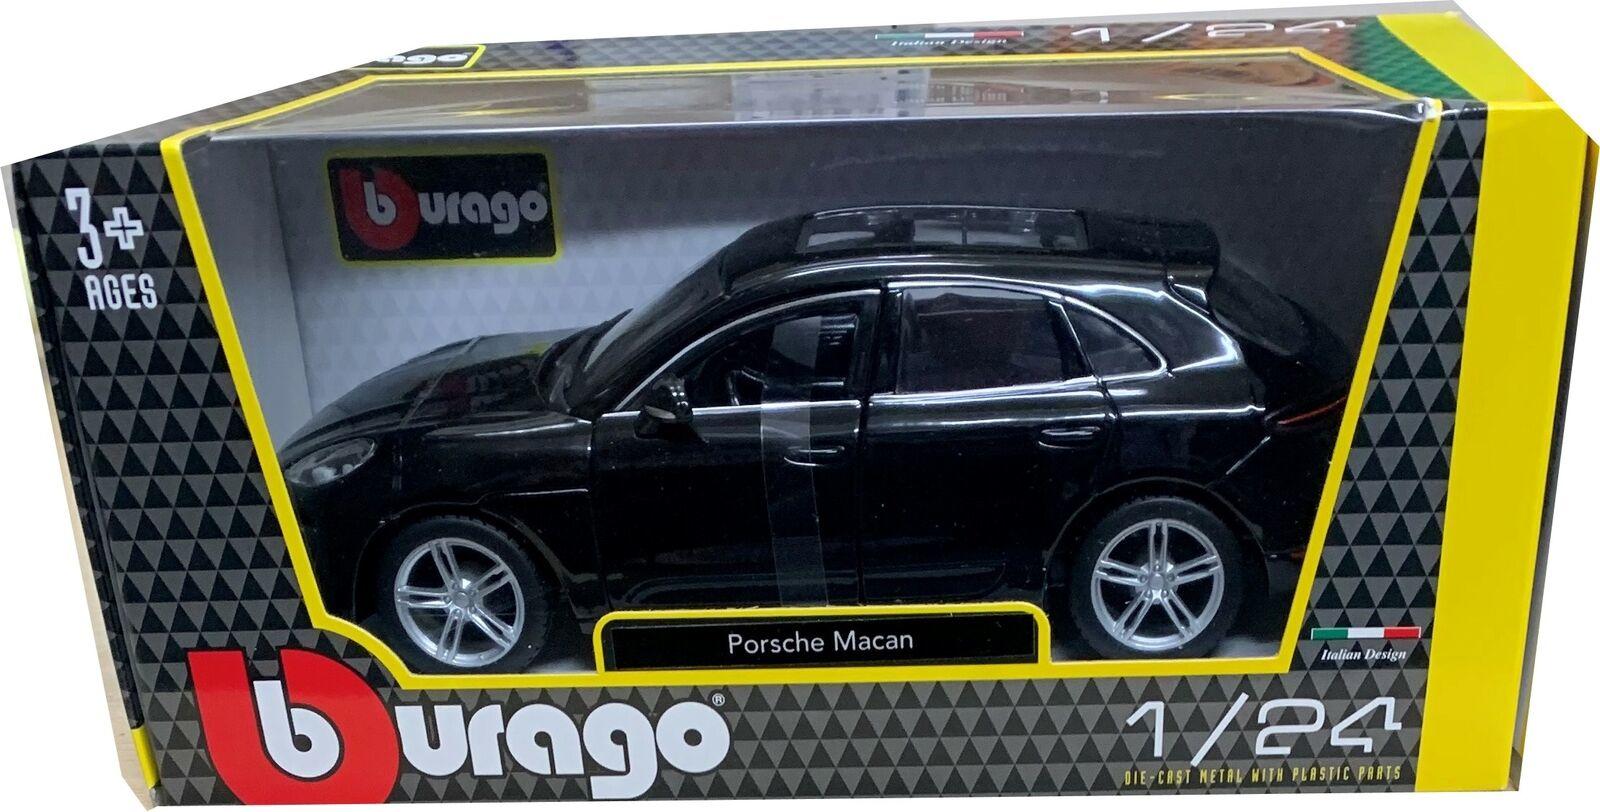 Porsche Macan in black 1:24, Model is mounted on a removable plinth and presented in a window display box. The car is approx. 19 cm long and the presentation box is 24 cm long